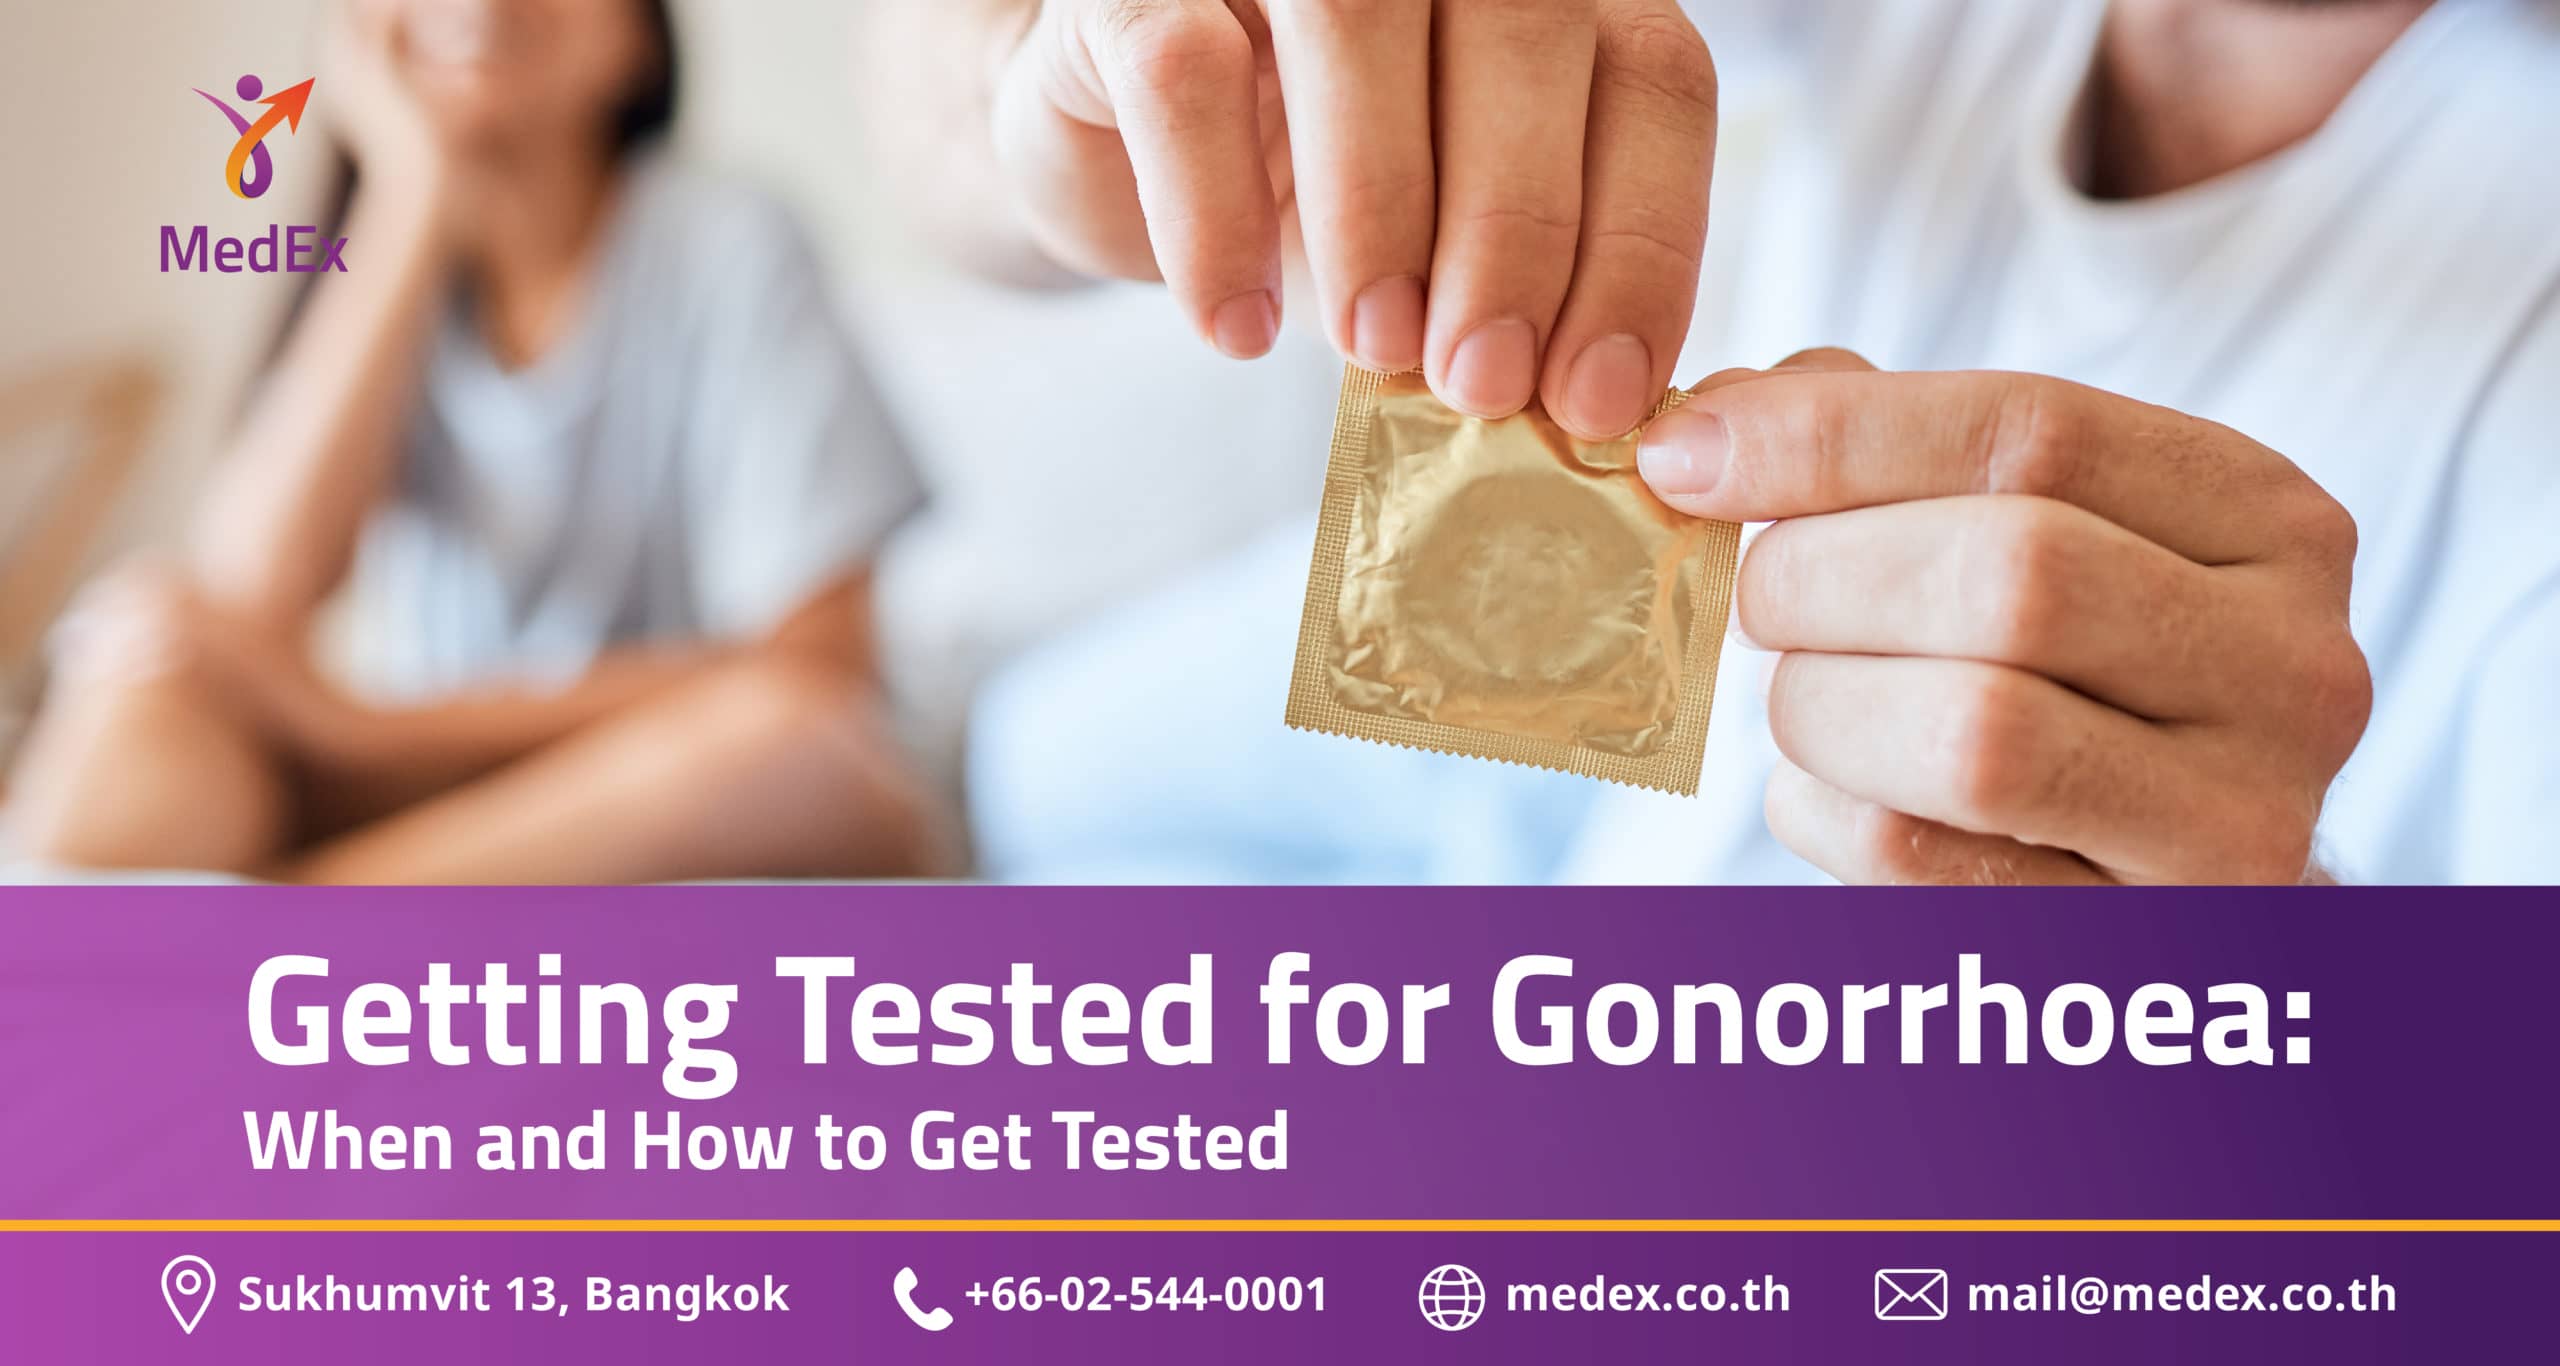 Getting Tested for Gonorrhea: When and How to Get Tested